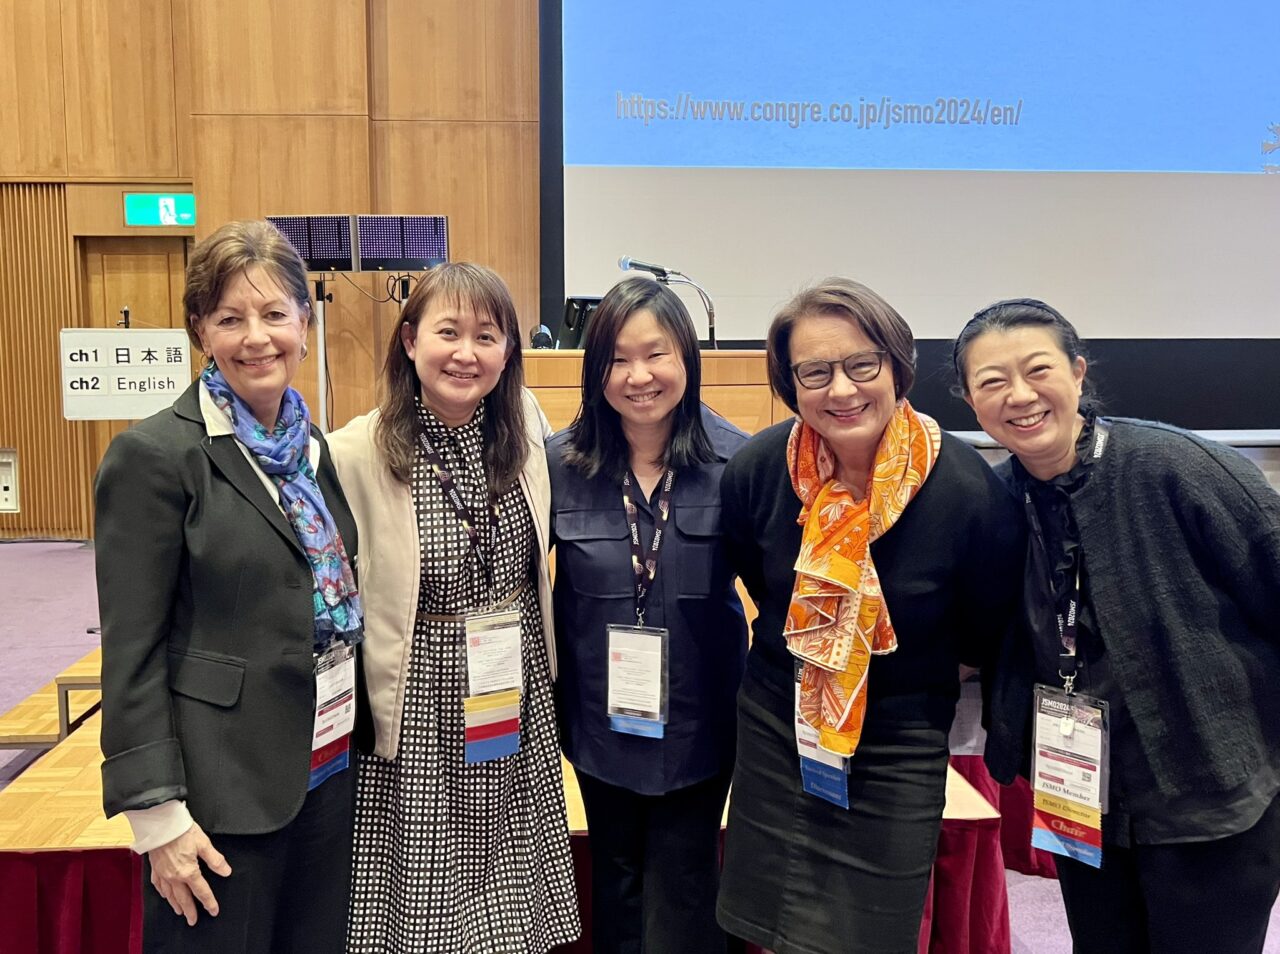 Lynn M. Schuchter: Enlightening first ever women in oncology session at Japanese Society of Medical Oncology